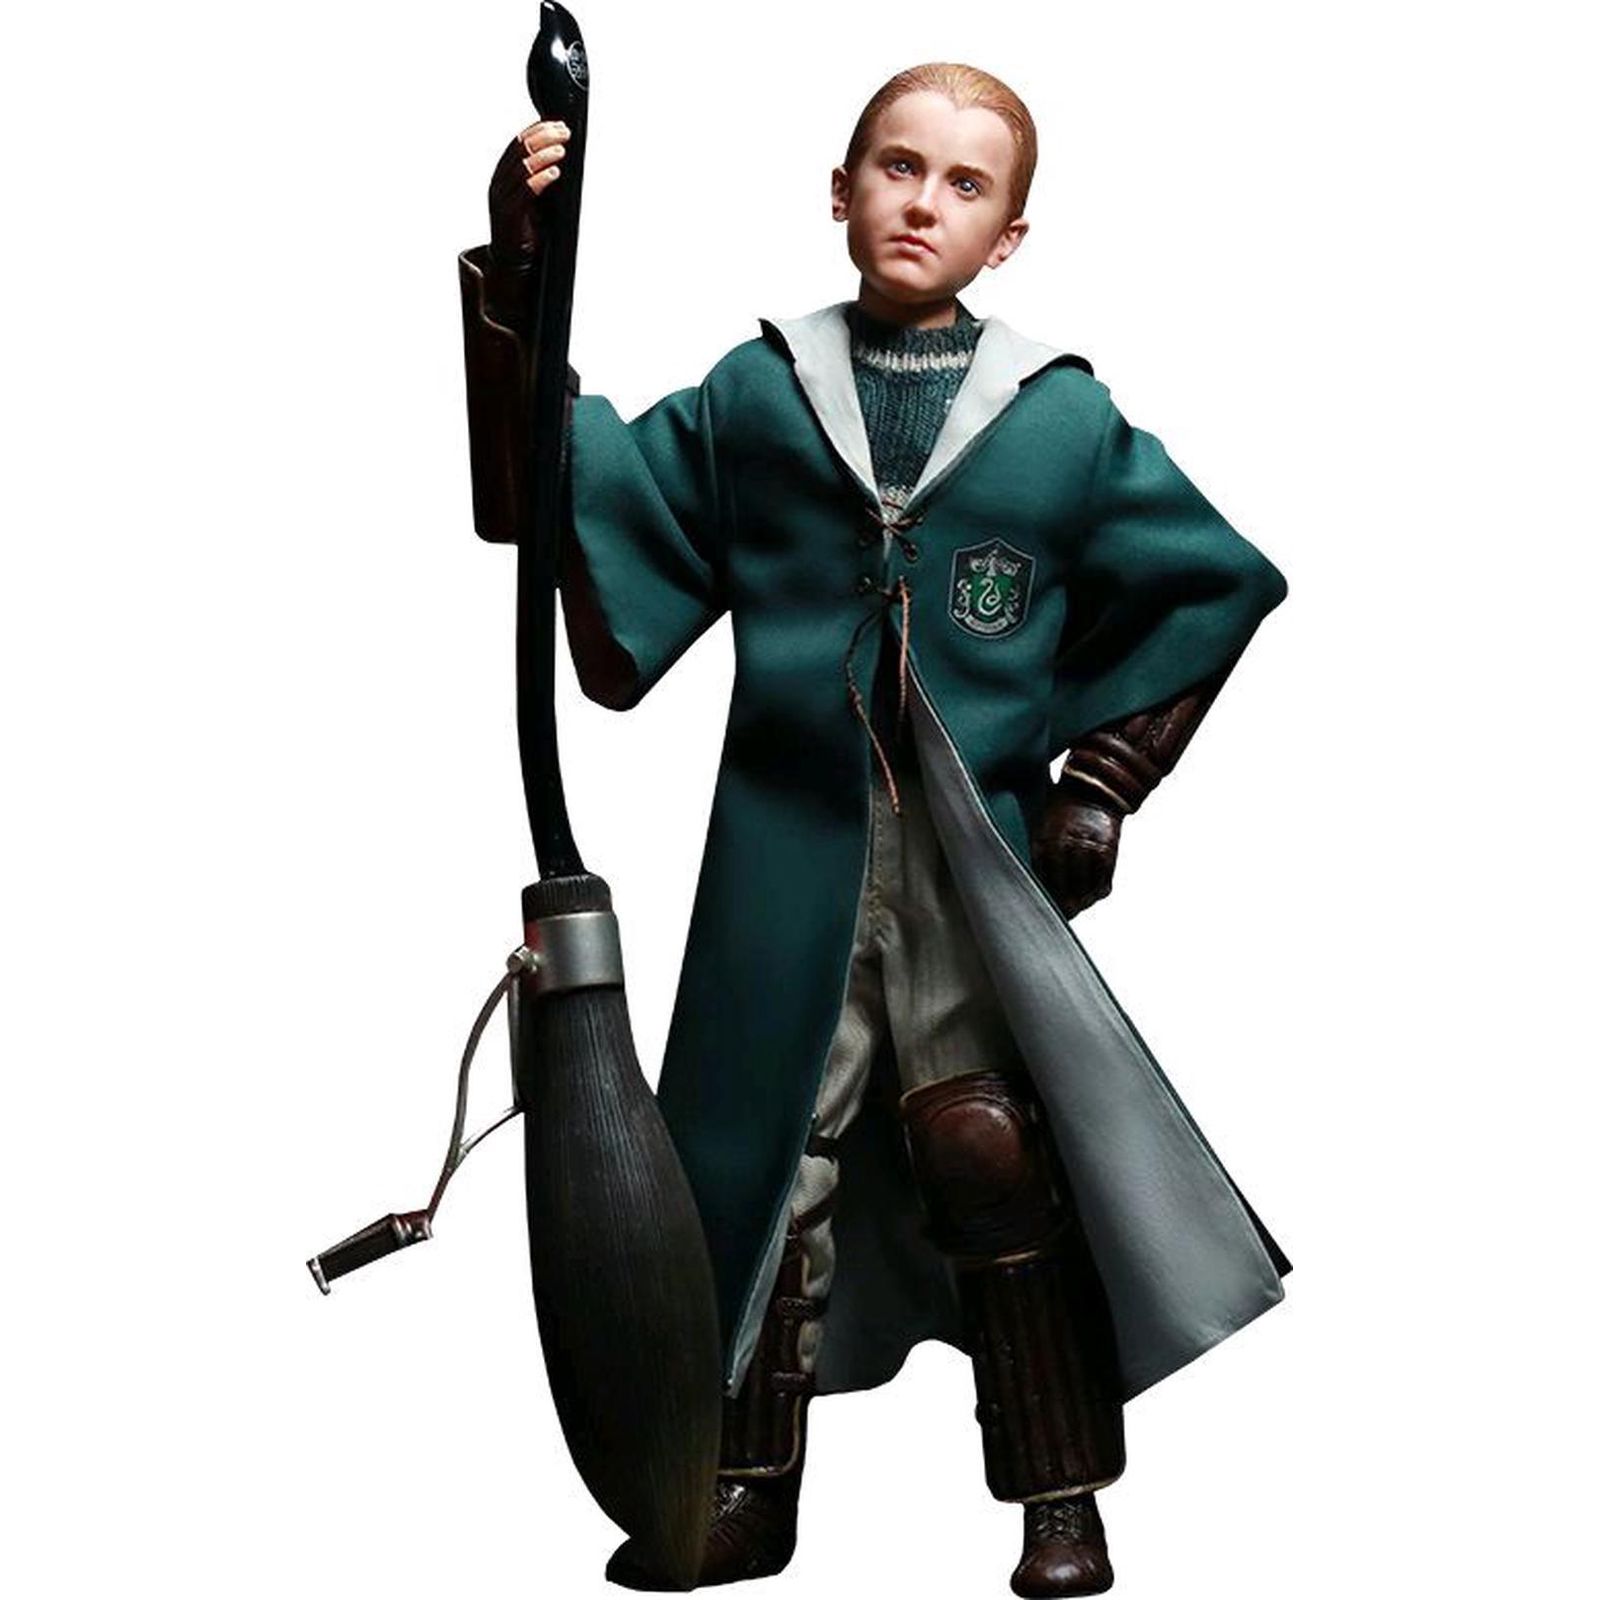 DRACO MALFOY (QUIDDITCH VERSION) FIGURA 26 CM HARRY POTTER STAR ACE